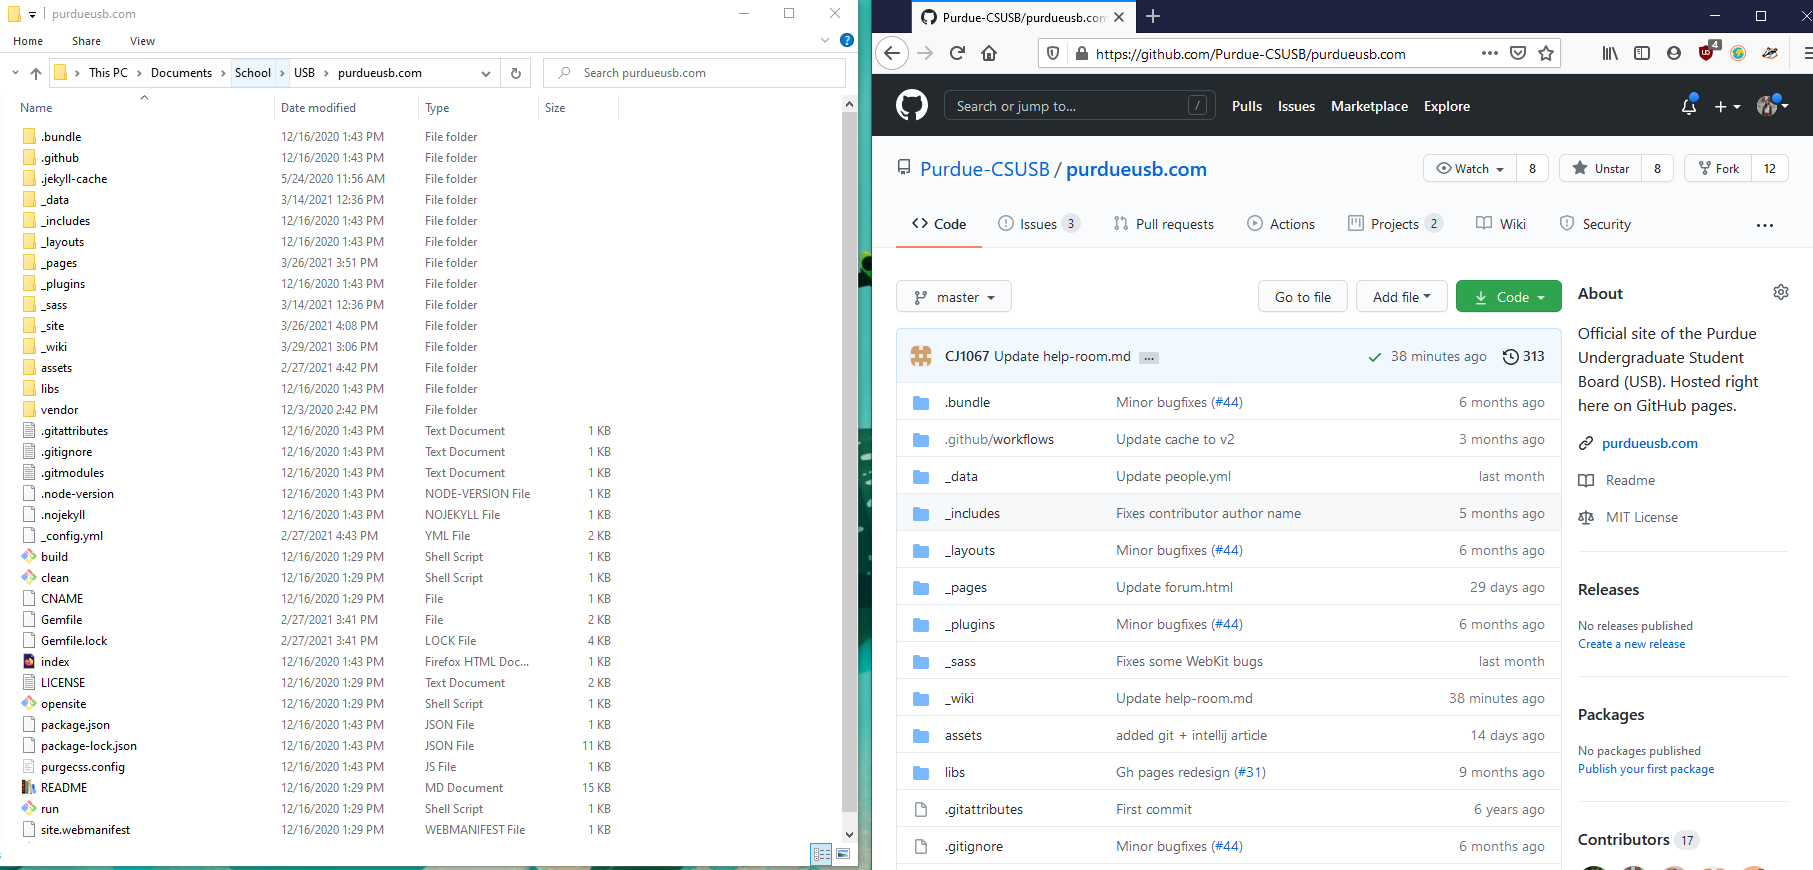 On the left is our local repository stored on our computer; on the right is the central repo on Github